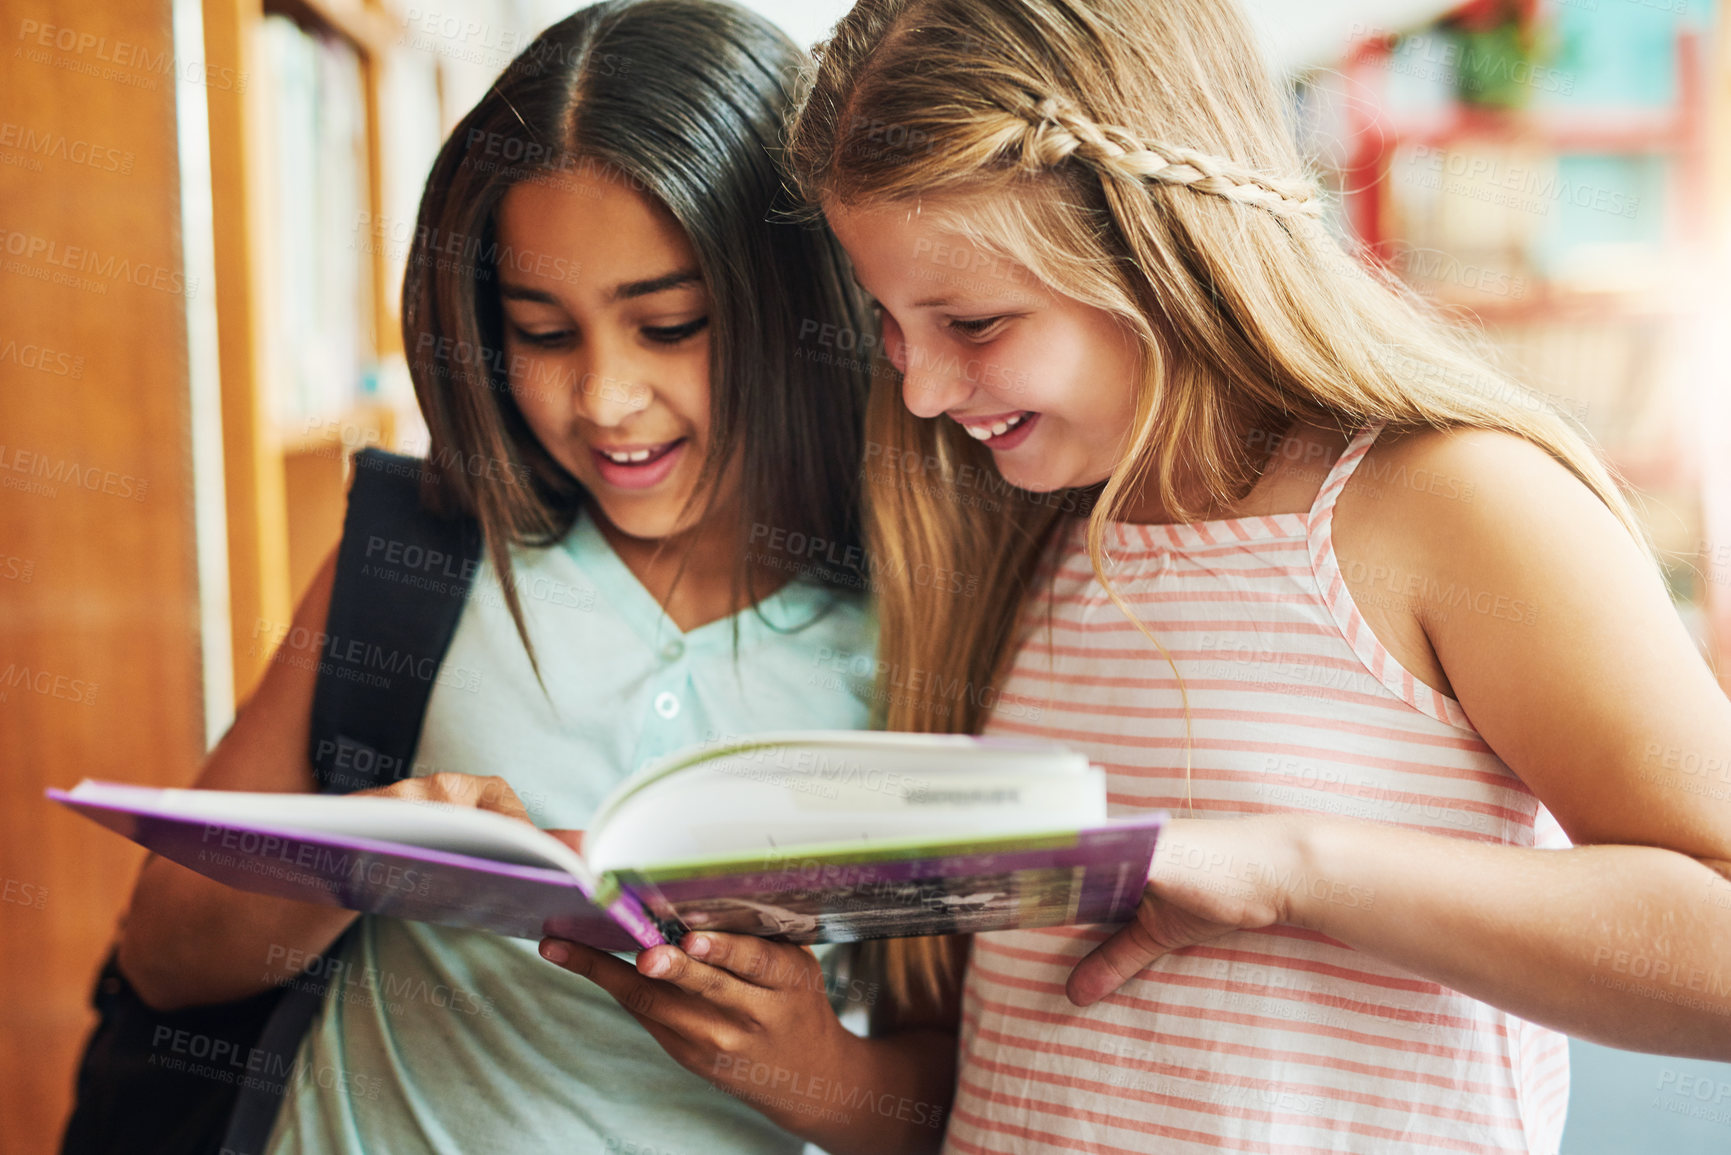 Buy stock photo Shot of two young school girls reading a book together while standing inside of a classroom during the day